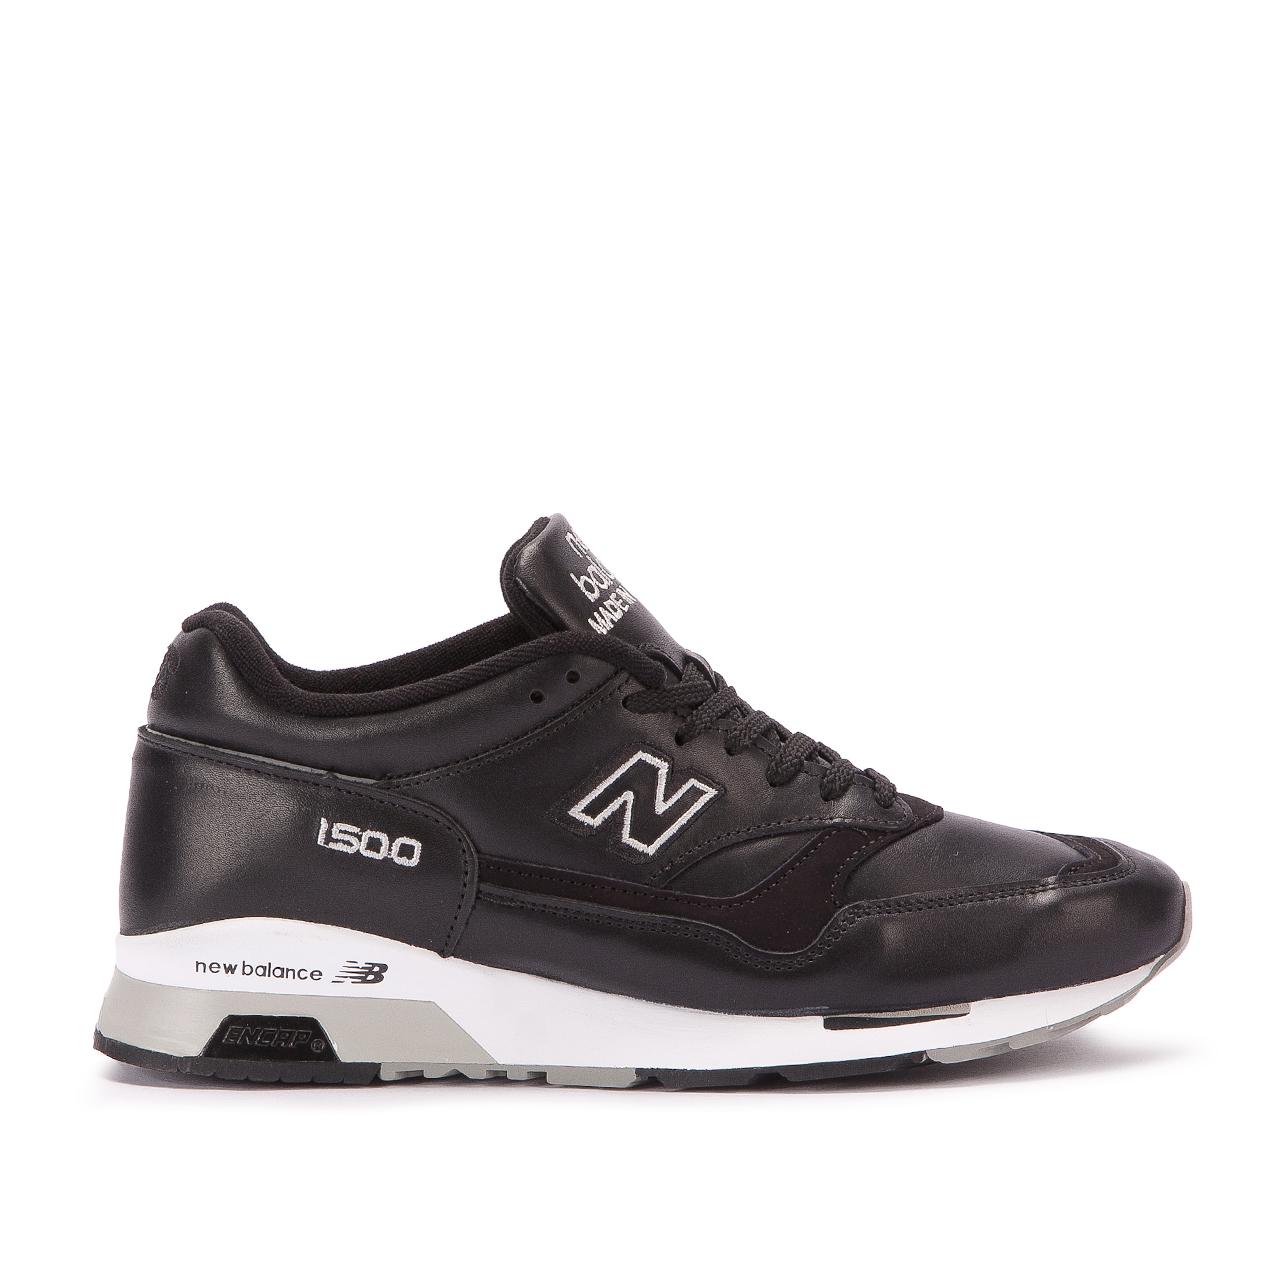 New Balance Leather M 1500 Bk Made In England in Black - Lyst